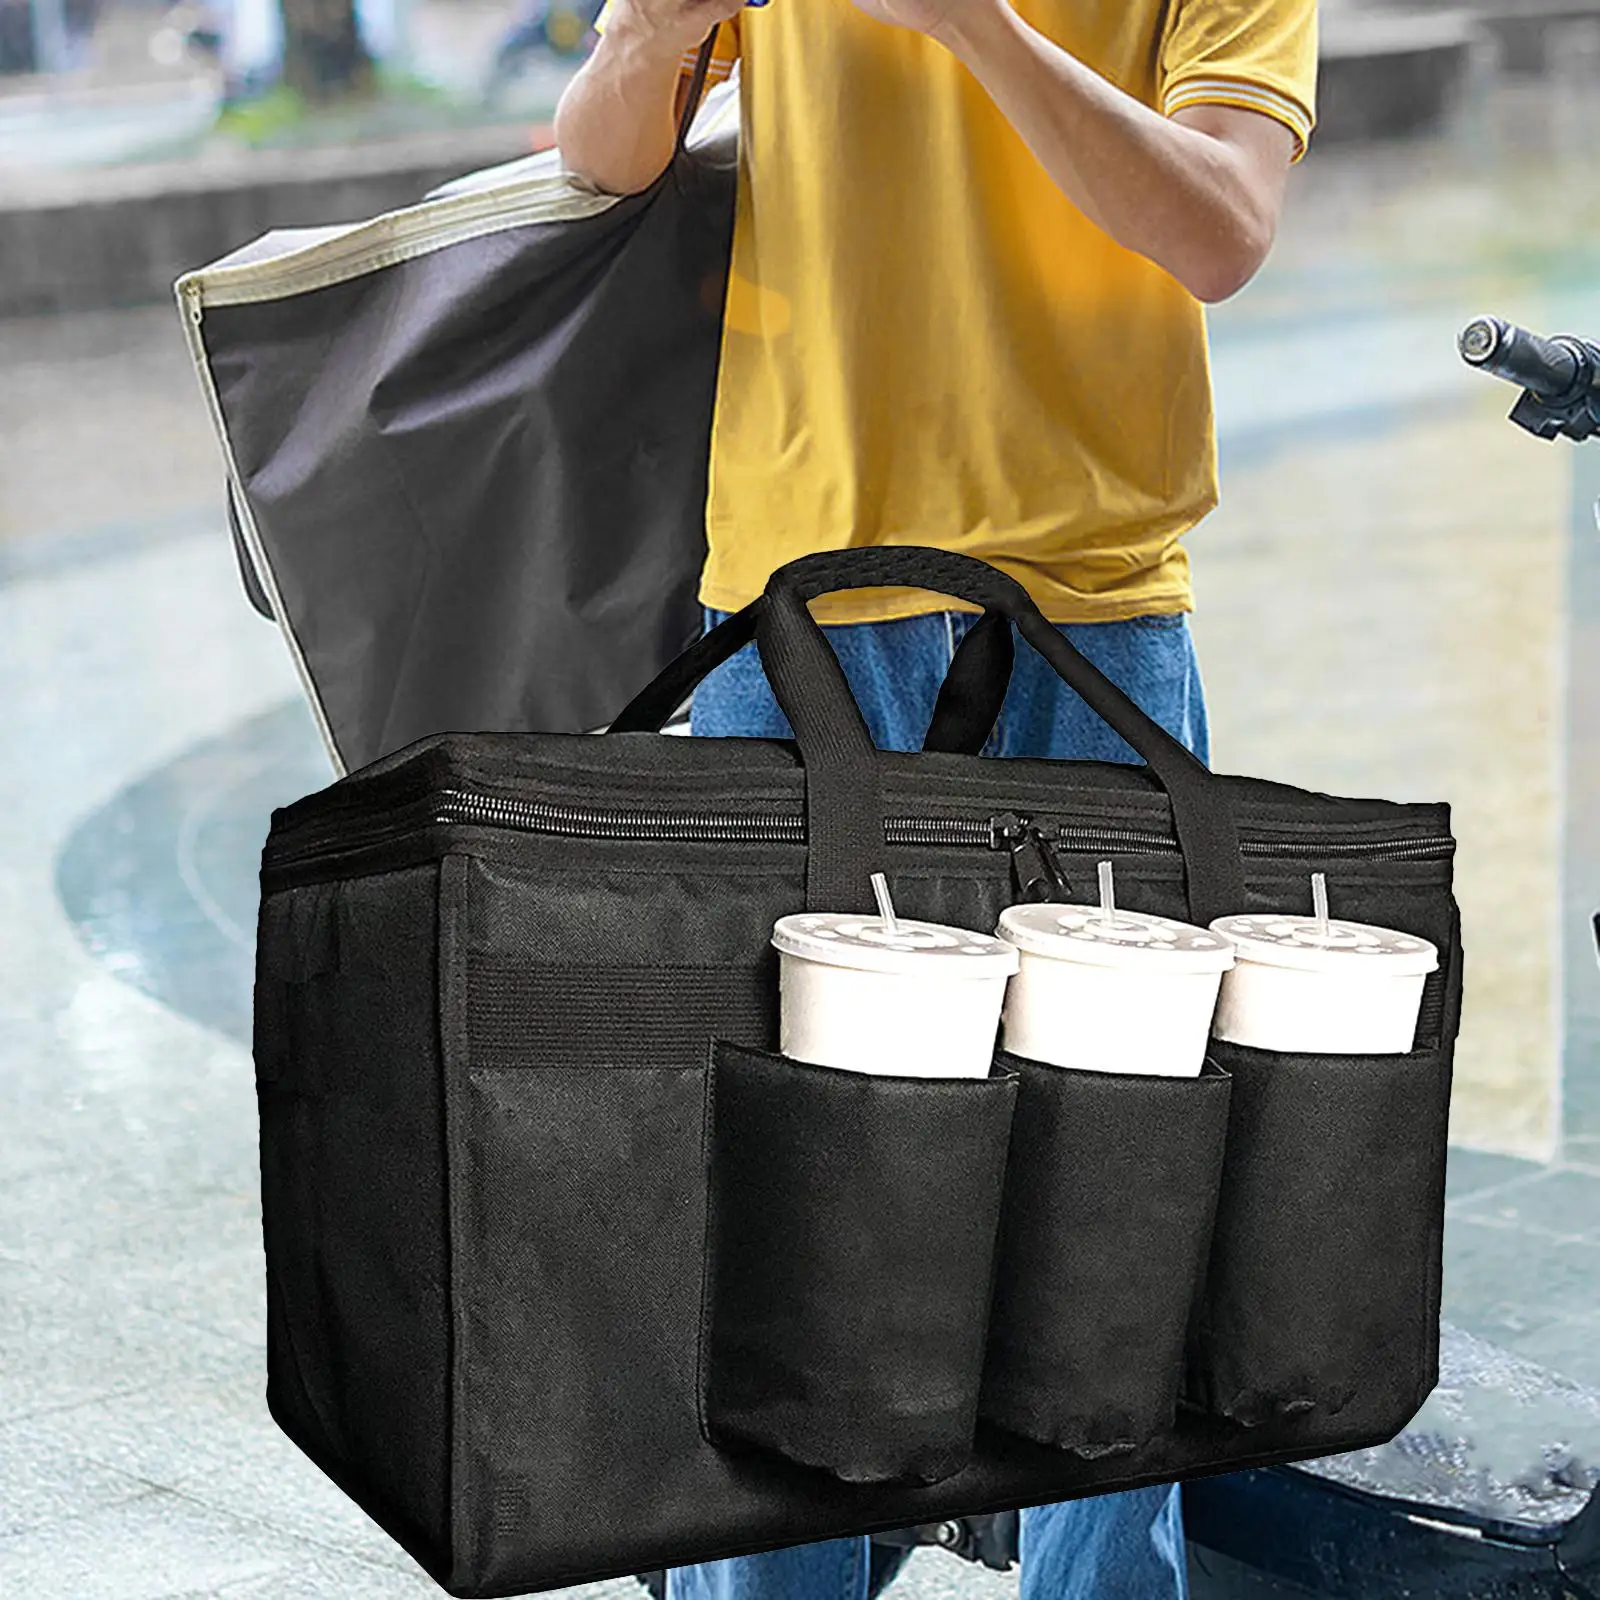 Insulated Food Delivery Bag Portable Cup Holder Insulated Picnic Bag for Outdoor Personal Restaurant Shopping Camping